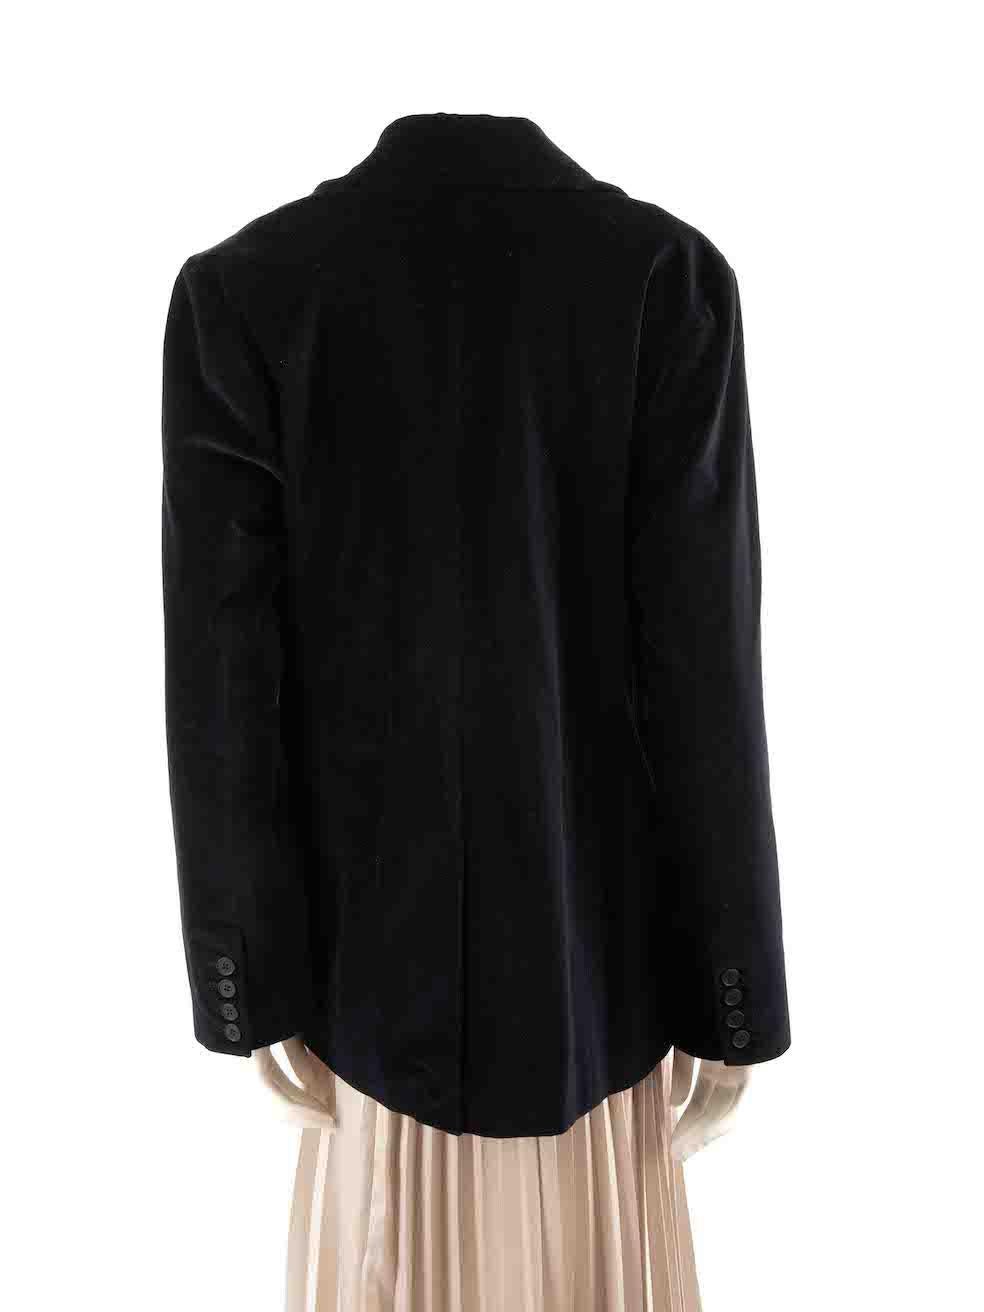 Jonathan Simkhai Black Velvet Double Breasted Blazer Size L In New Condition For Sale In London, GB